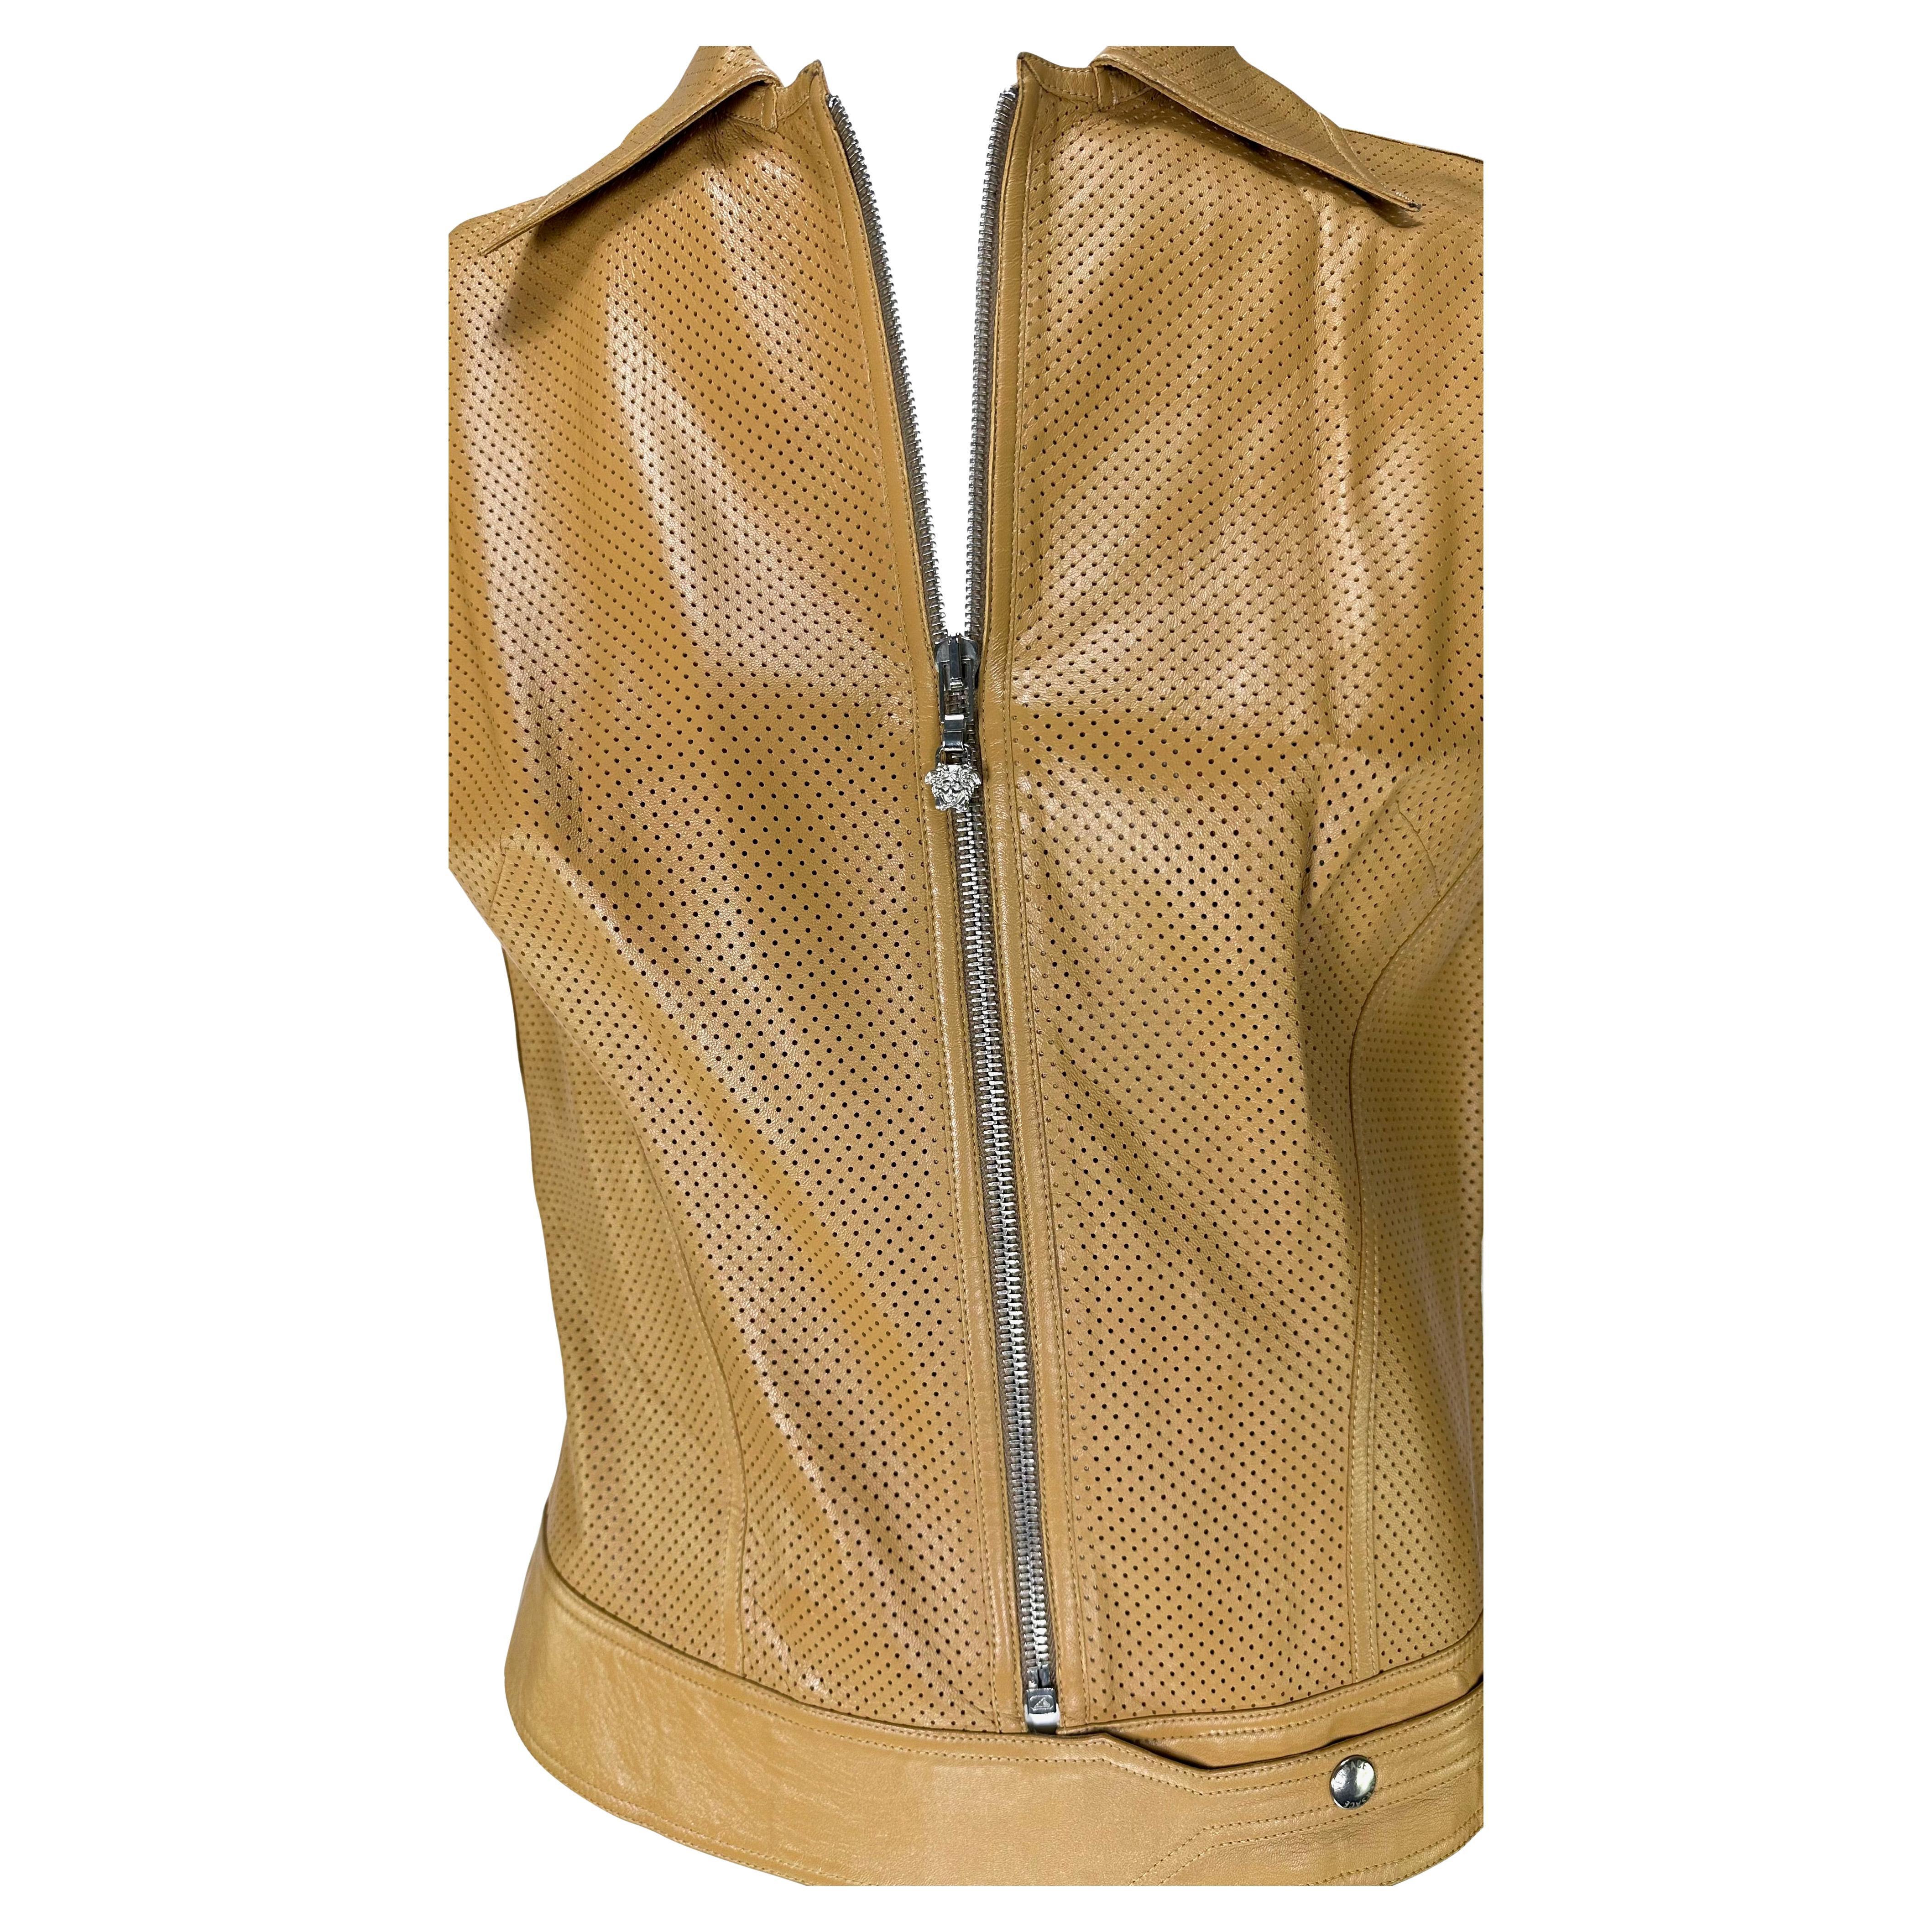 Presenting a tan Versace perforated leather vest, designed by Donatella Versace. From the early 2000s, this fabulous vest is constructed of perforated leather and features a collar, belted snap waist, and is made complete with a silver-tone Versace